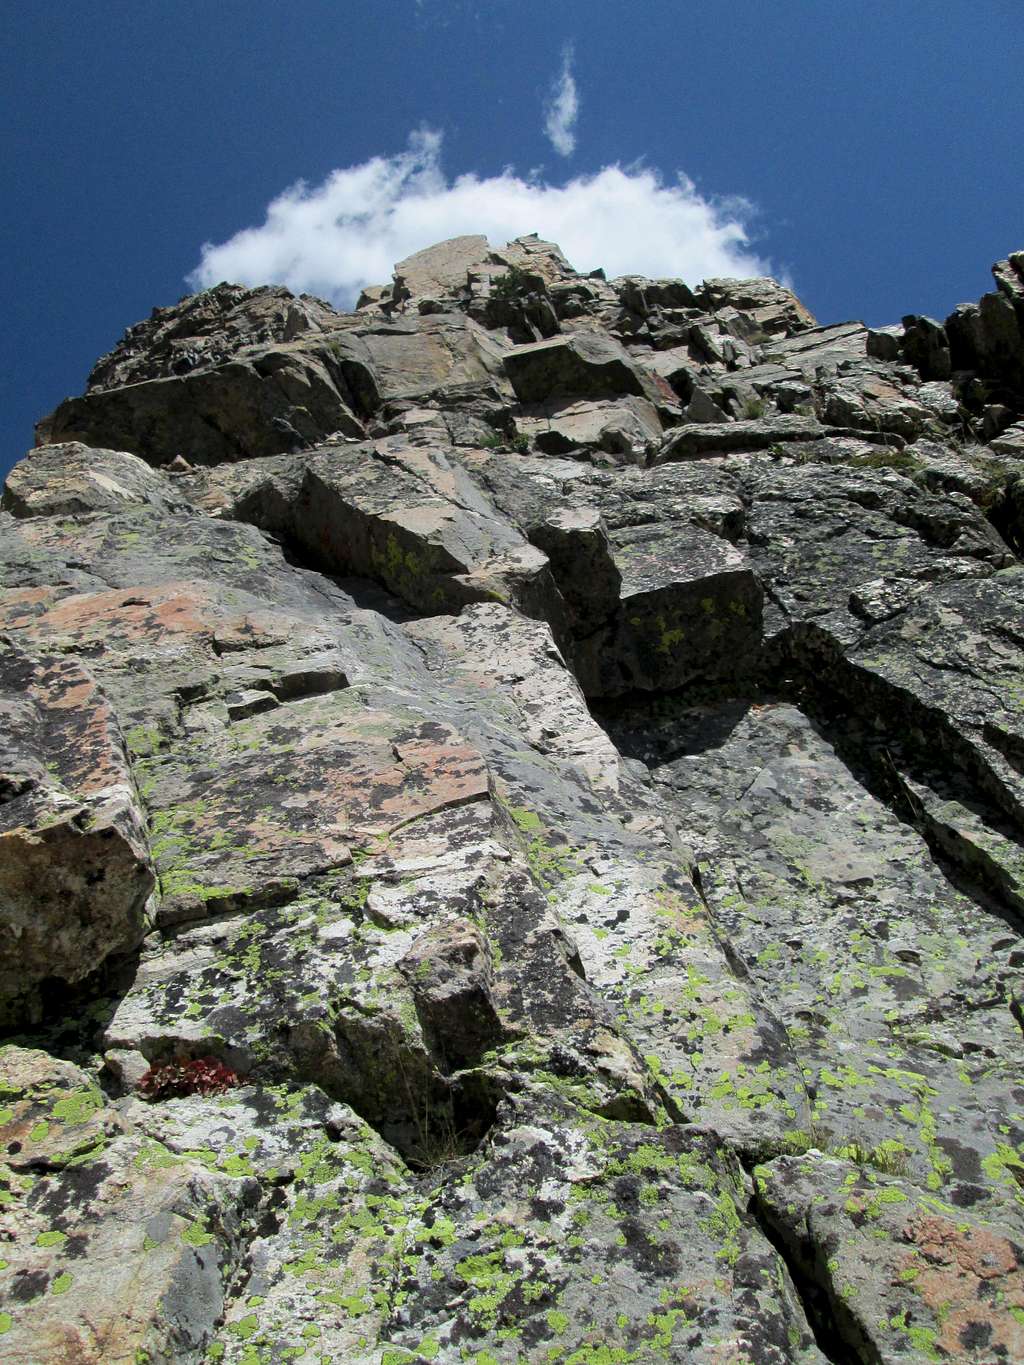 Looking up at the first pitch of the Southwest Ridge(YDS 5.7) of Symmetry Spire, Teton Range, WY